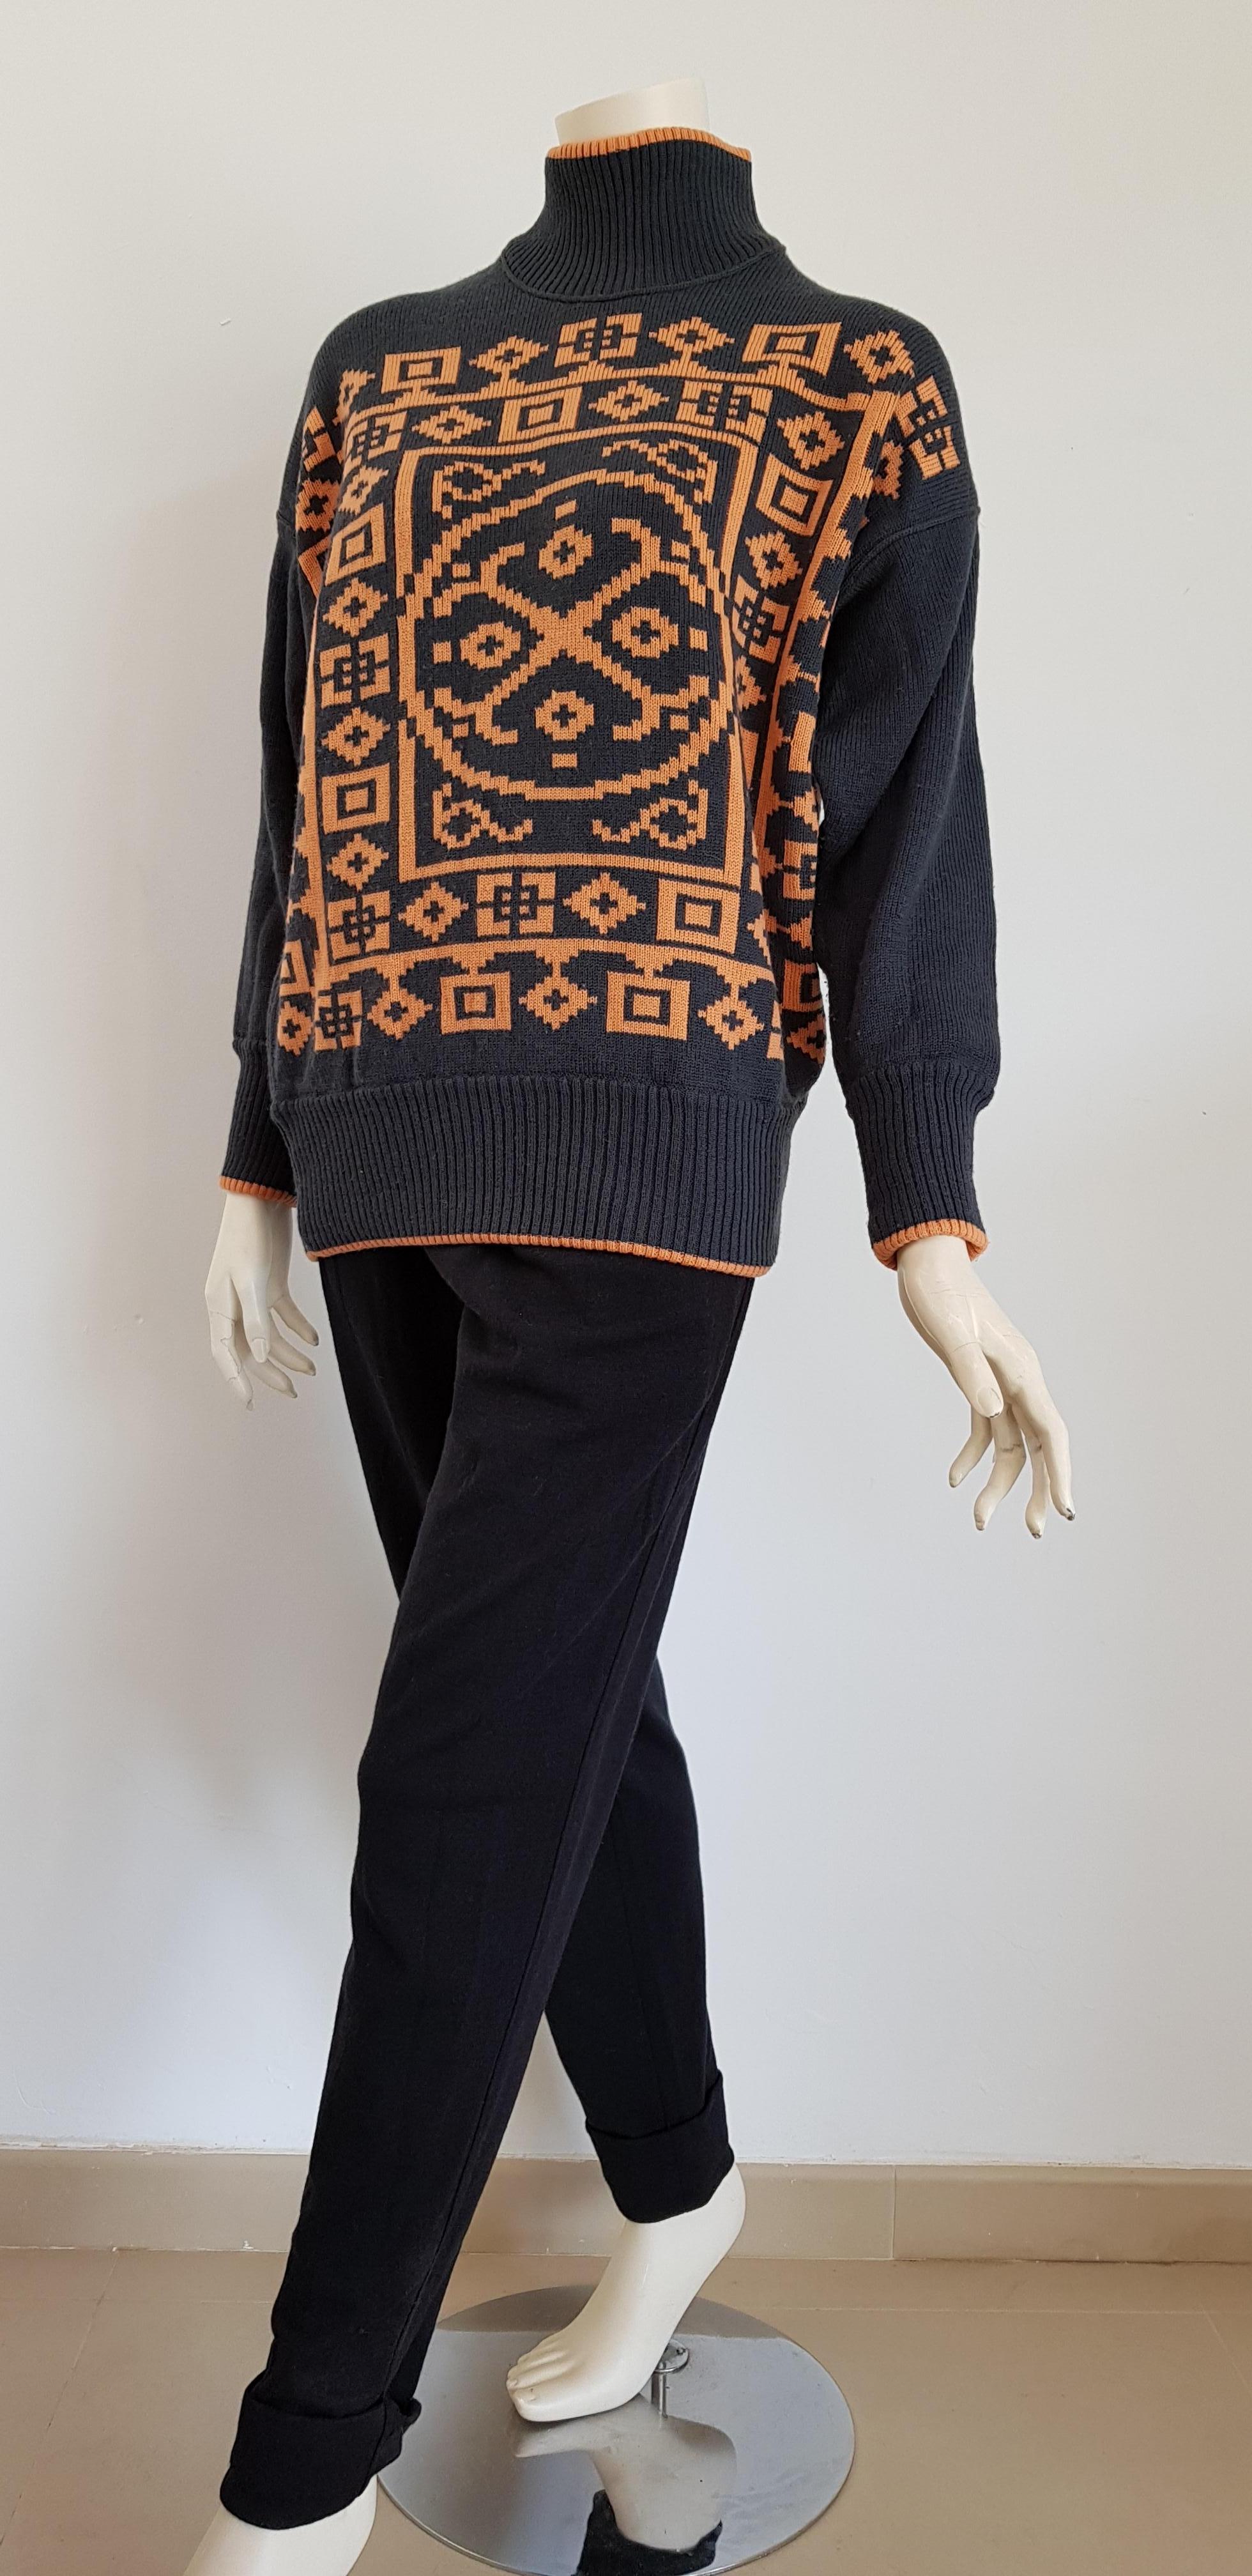 Claude MONTANA sweater Maya design single piece, black wool trousers, ensemble - Unworn, New.
..
SIZE: equivalent to about Small / Medium, please review approx measurements as follows in cm. 
SWEATER: lenght 69, chest underarm to underarm 60, bust